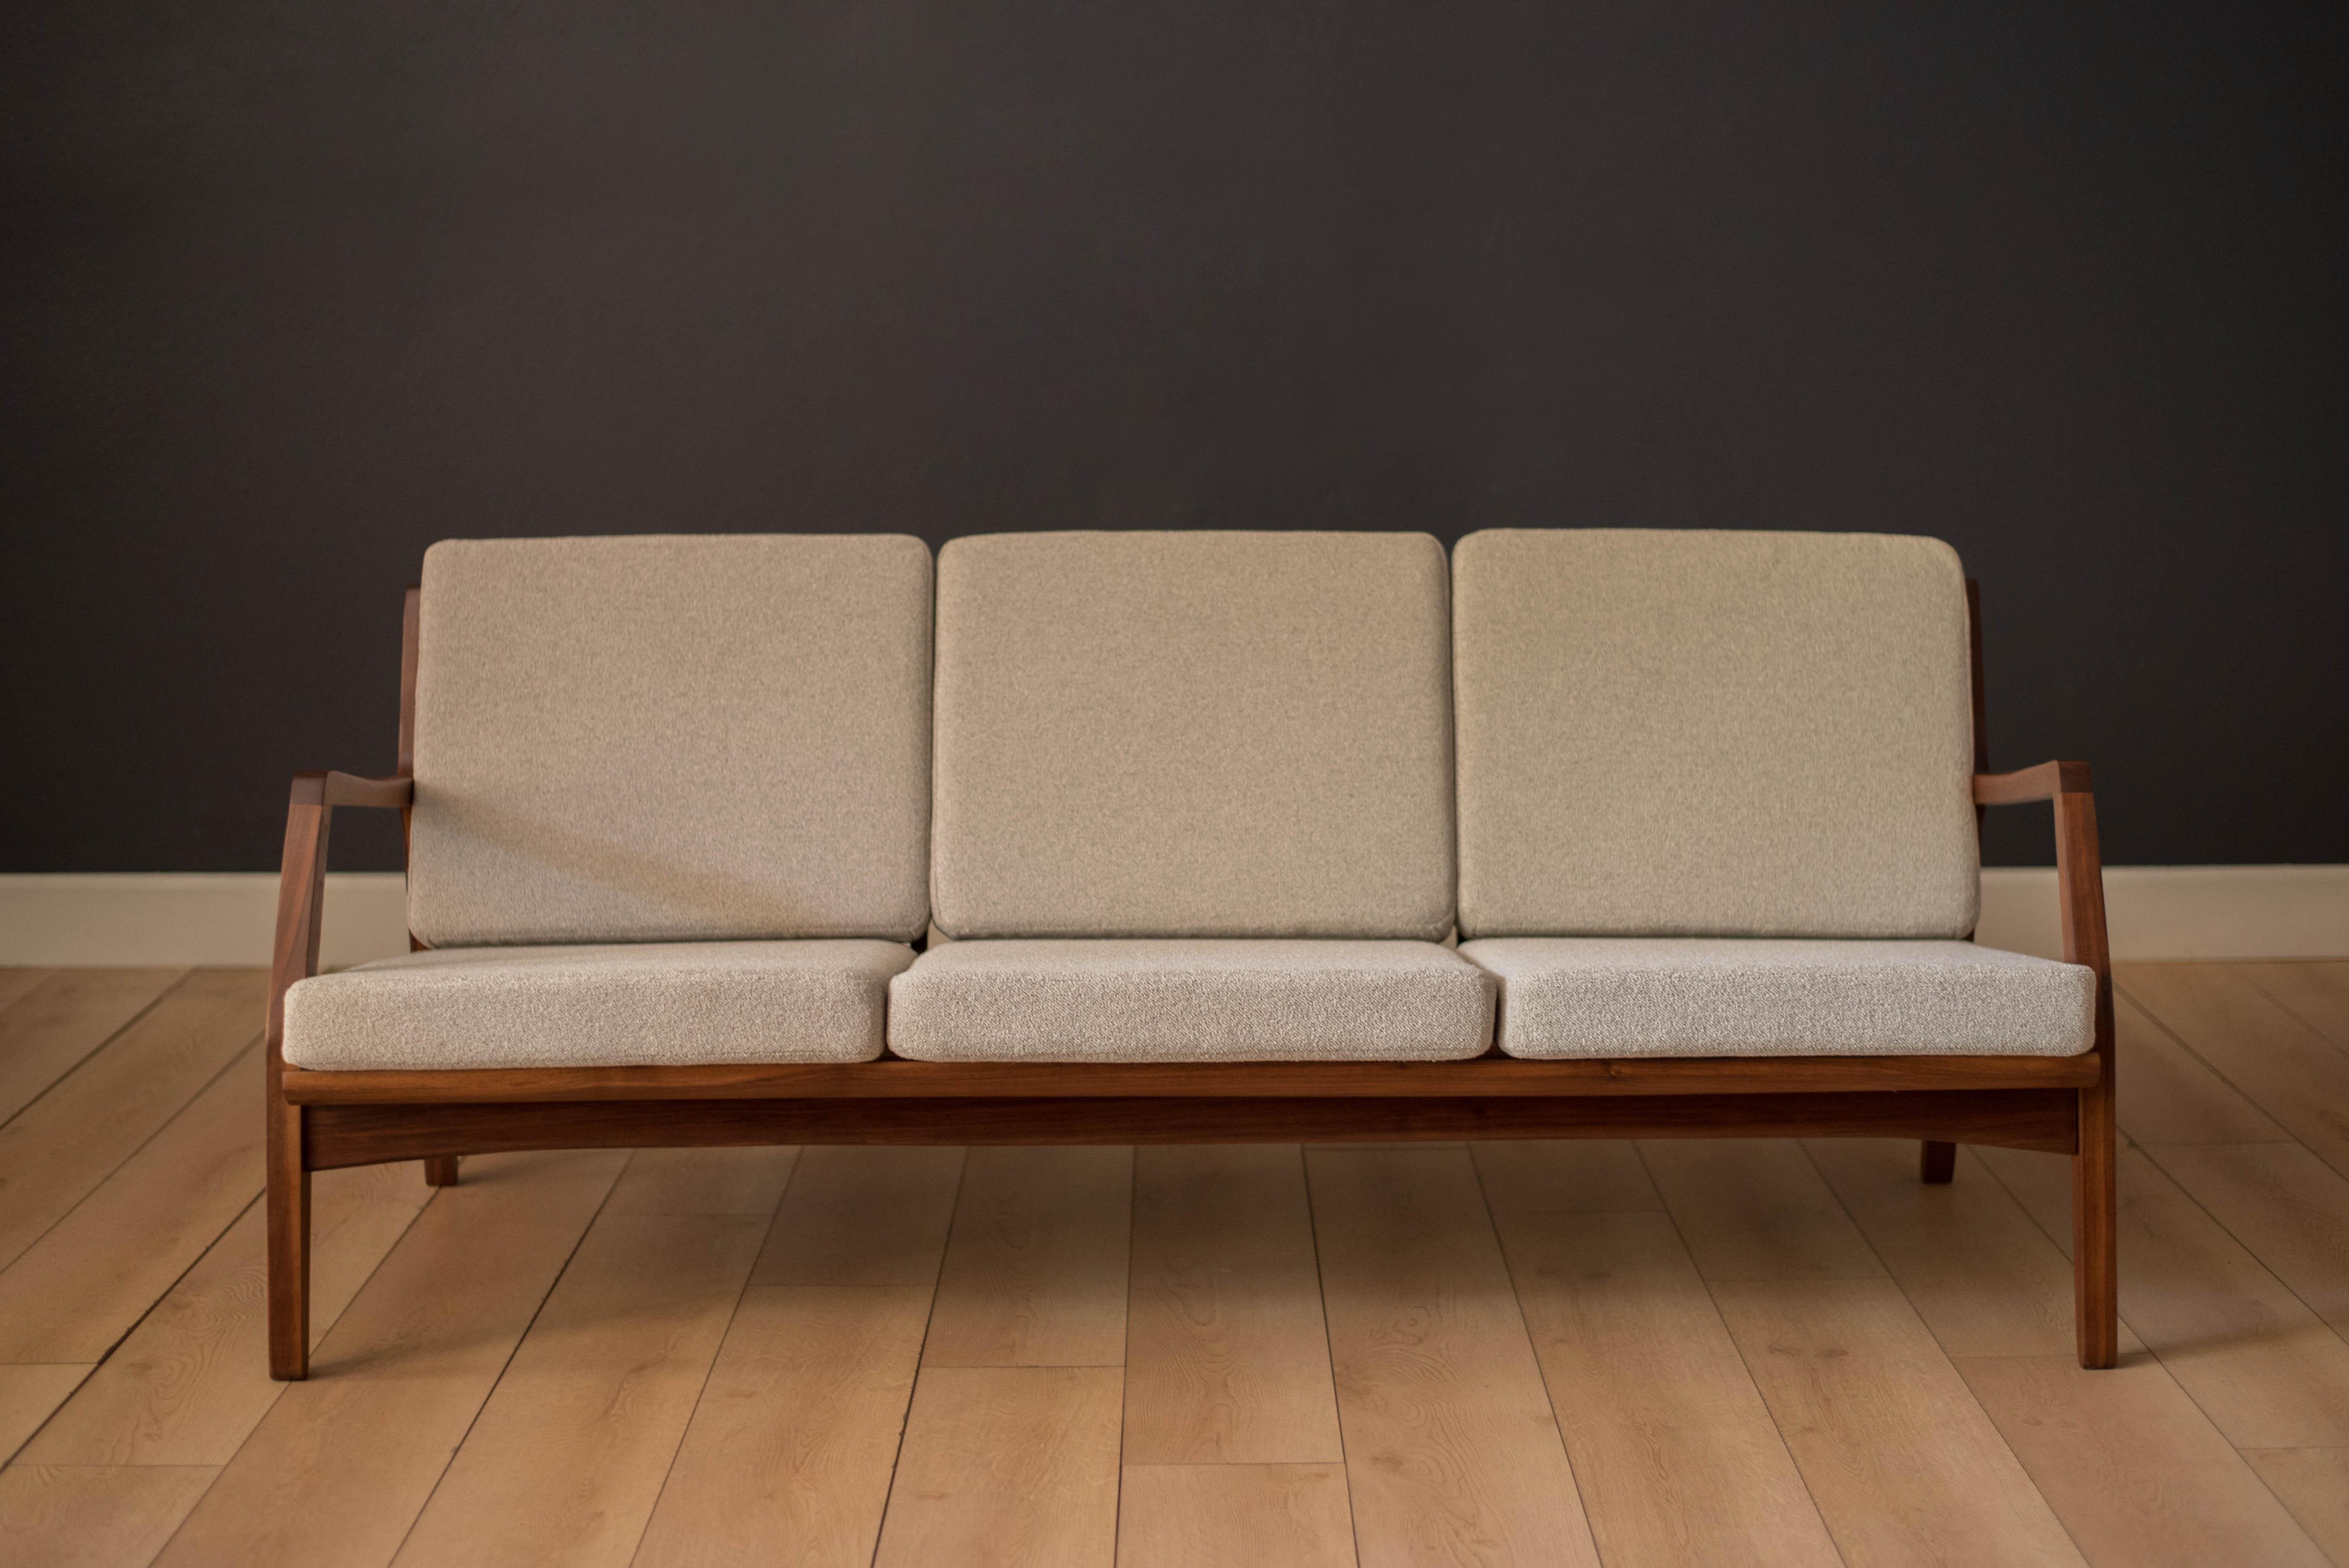 Vintage three-seat sofa constructed of solid walnut, circa 1960s. This piece has been professionally reupholstered in a nubby light grey boucle fabric supported by brand new Pirelli webbing. Features a sculptural walnut frame that can be displayed